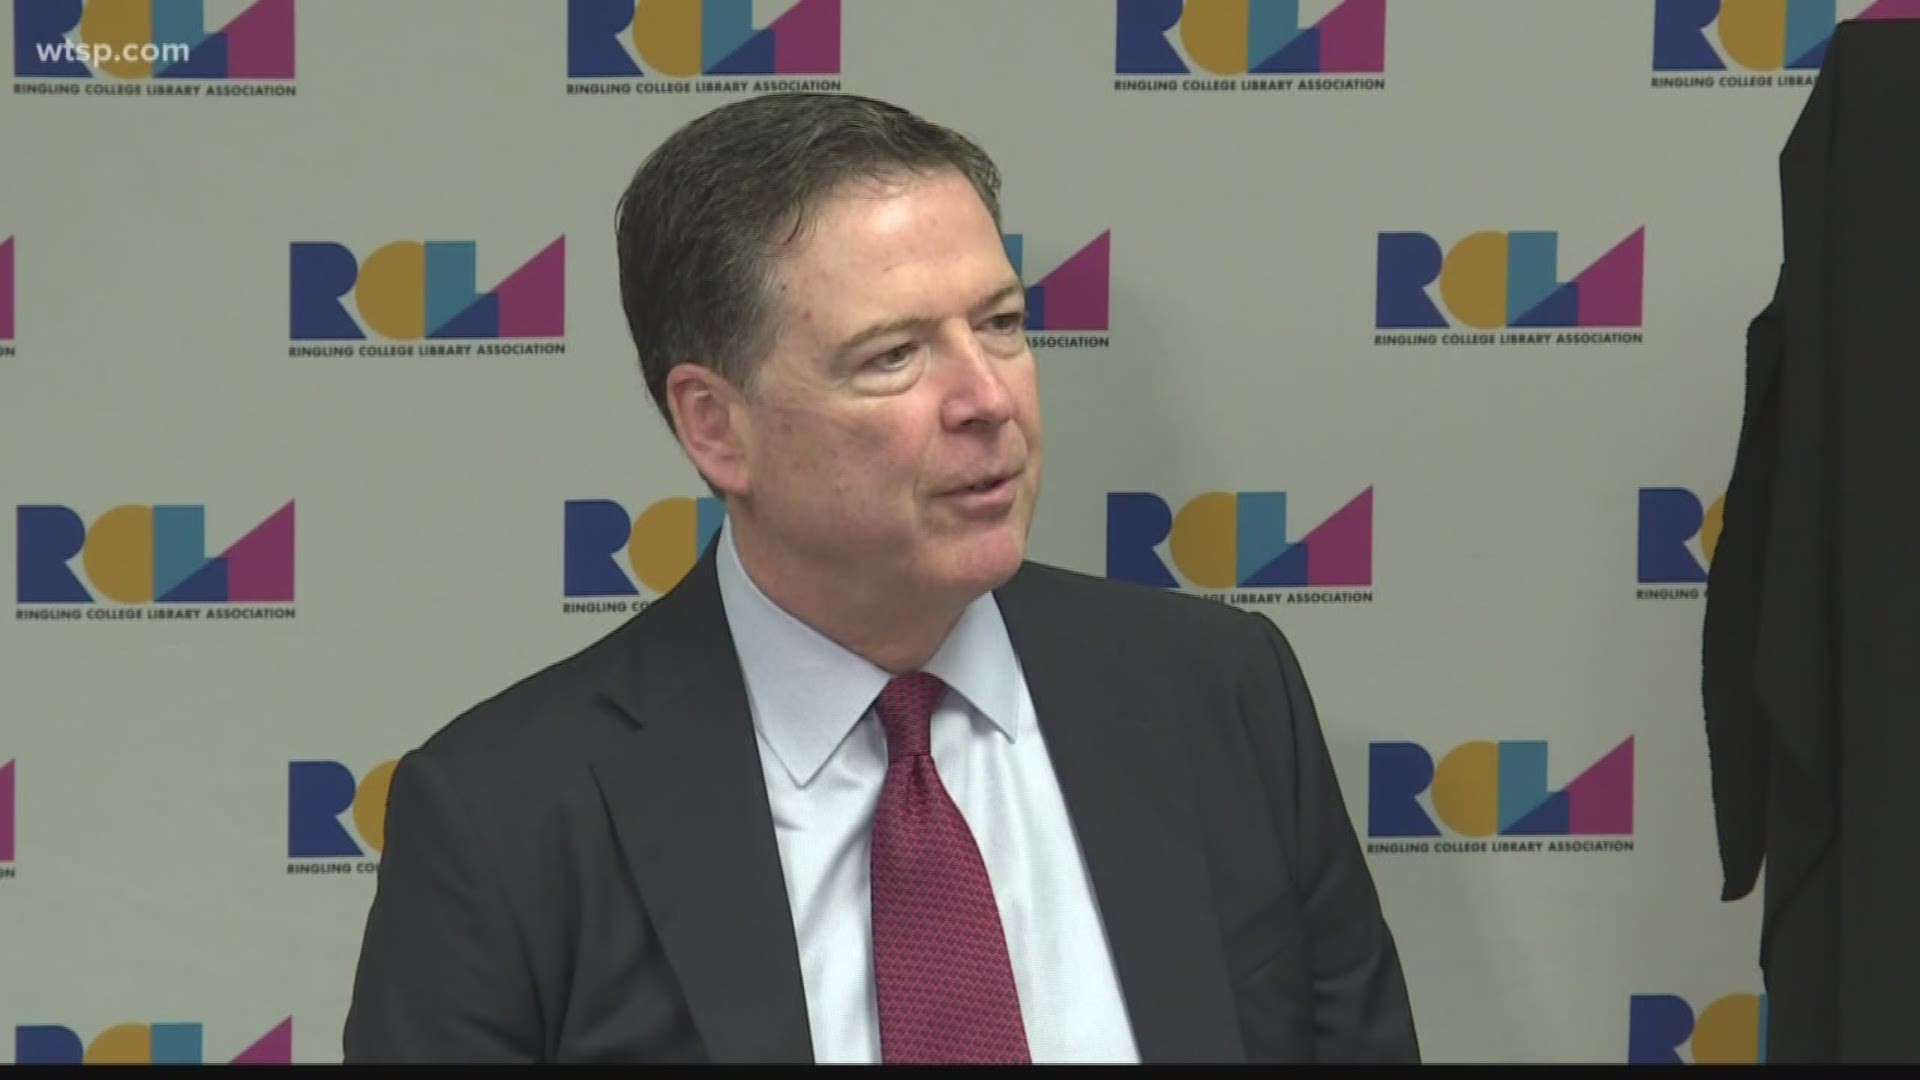 Comey has been a critic of President Trump since he was fired but says no one should root for the investigation to turn out one way or the other.